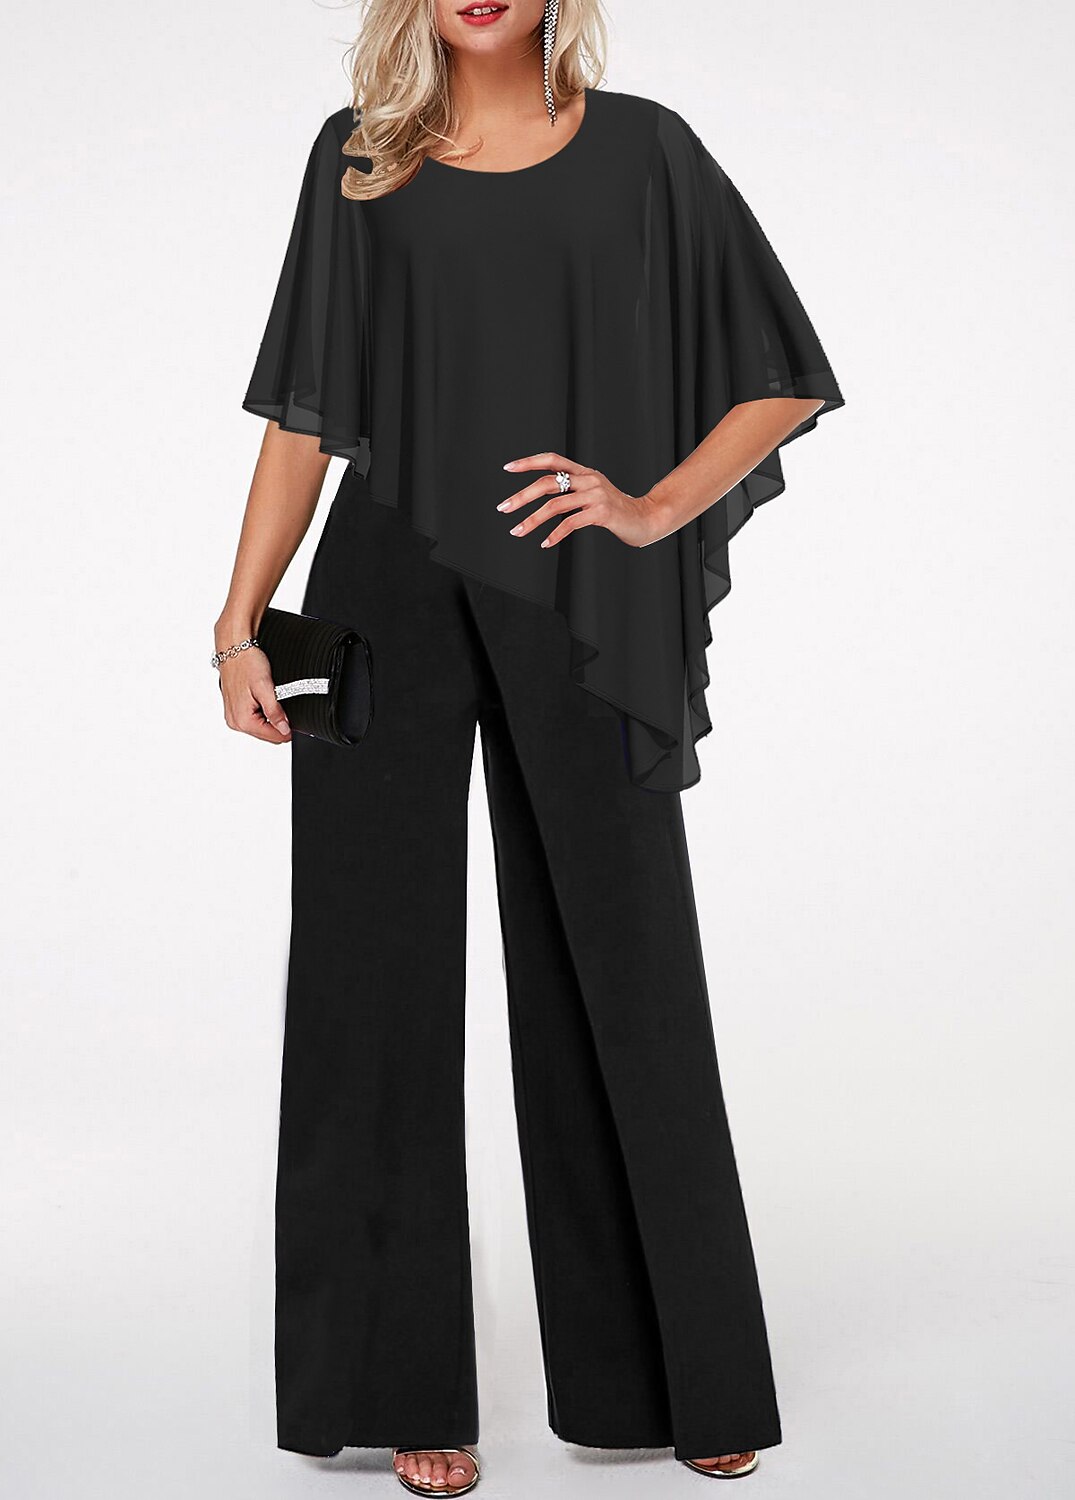 Shepicker Patchwork Cape Formal Daily Holiday Straight Sleeveless Jumpsuit